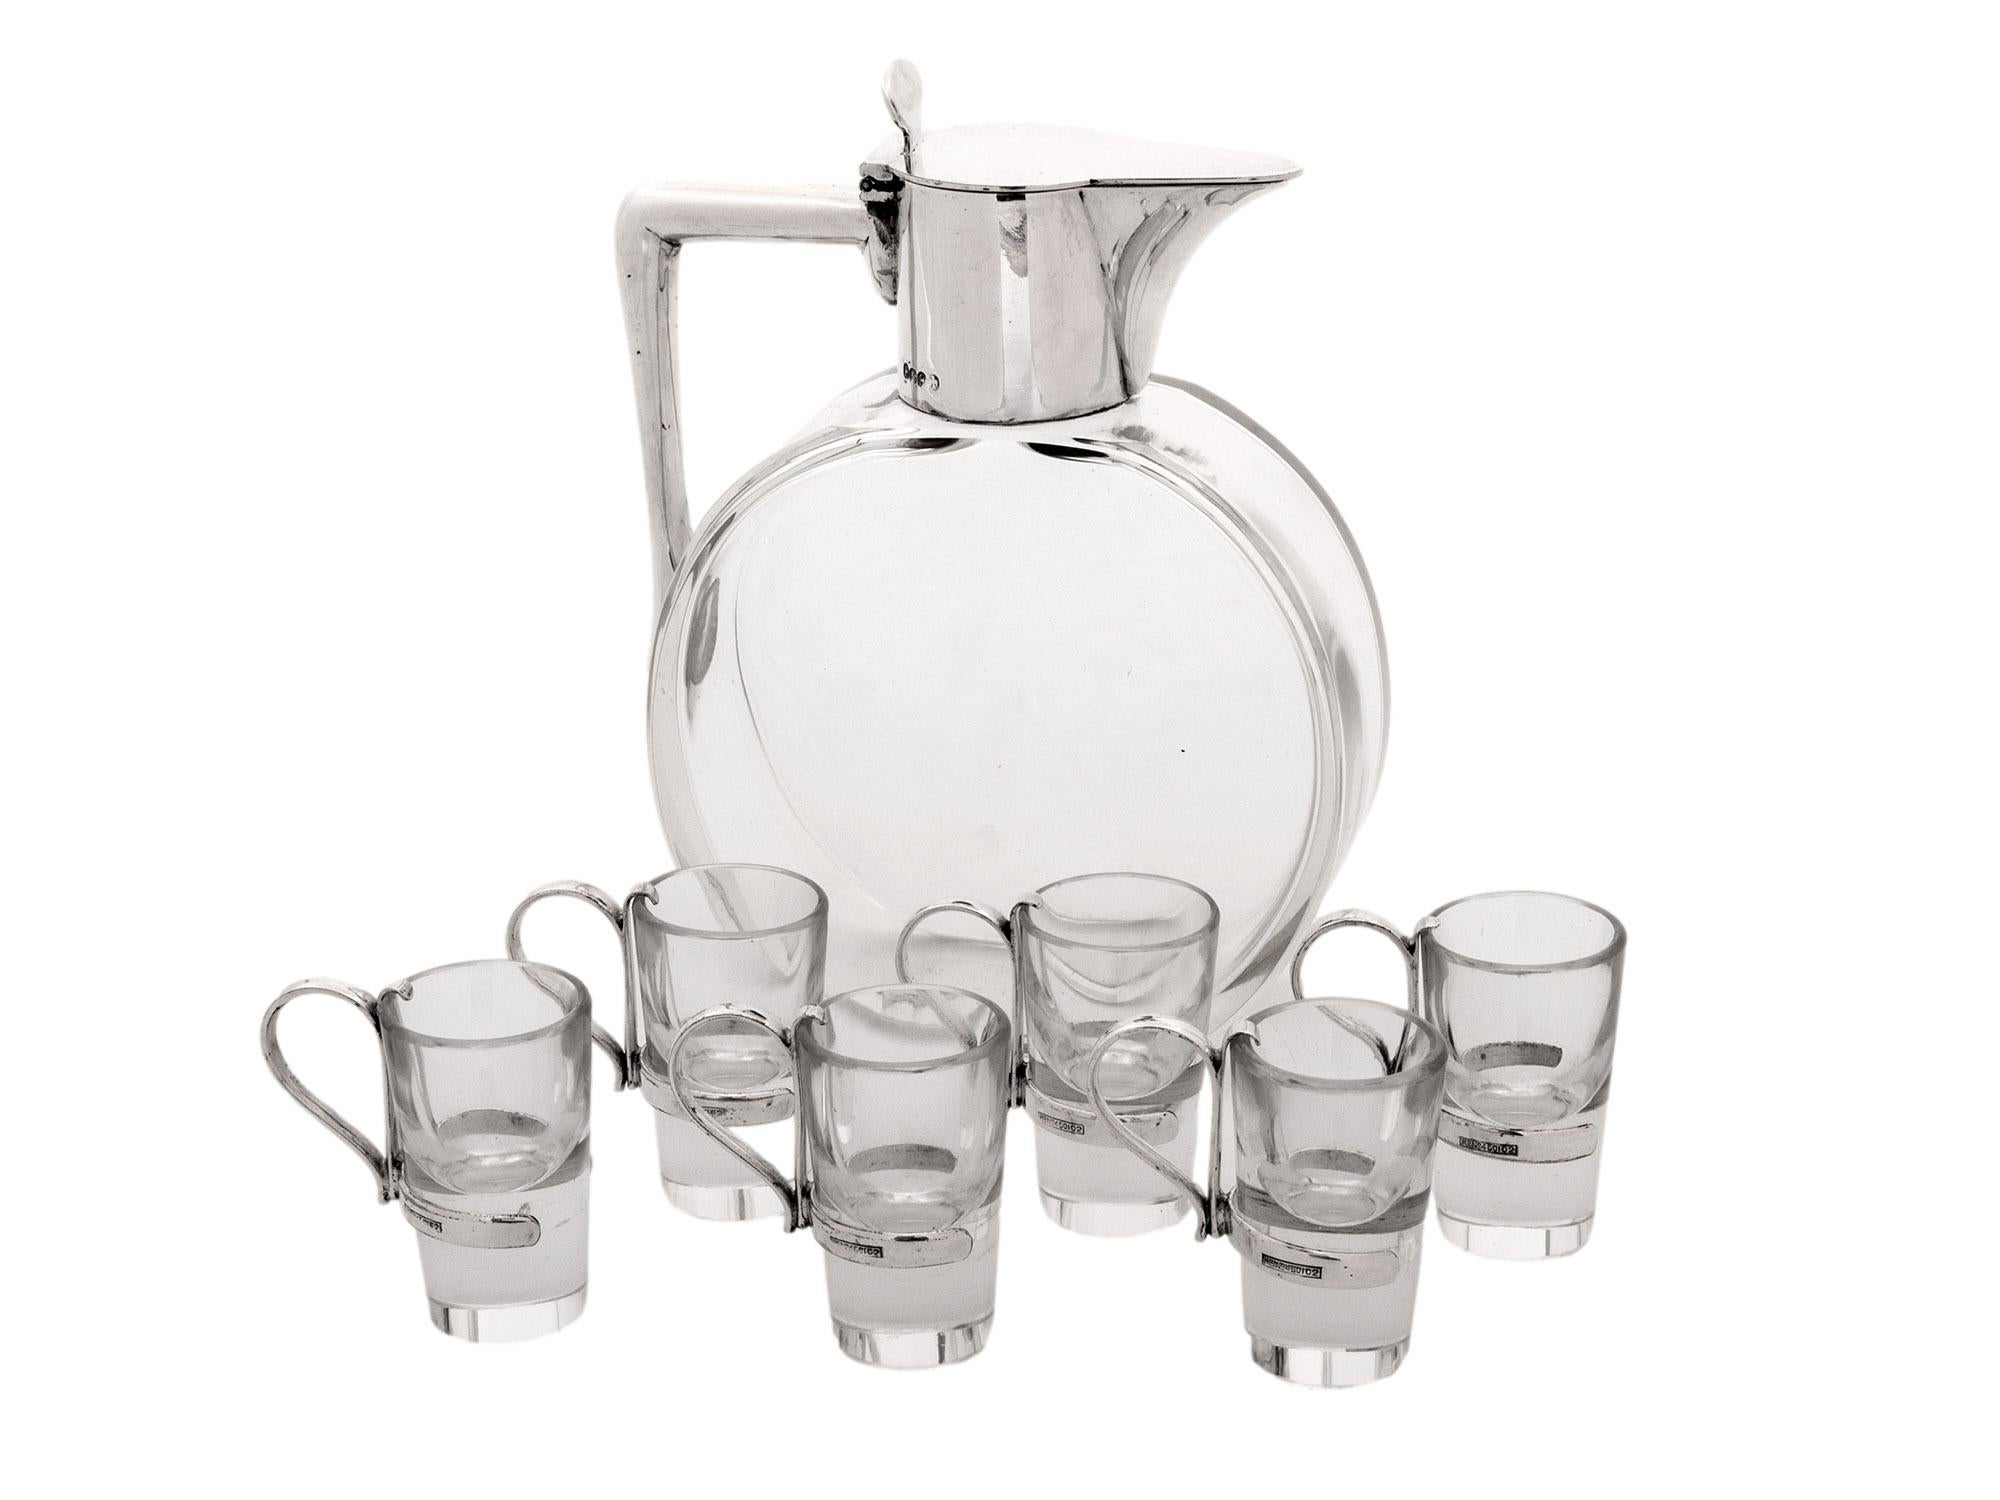 Christopher Dresser Style Decanter & Six Glasses with Removable Handles

From our Decanter collection, we are pleased to offer this stylish Art Deco style Decanter set by renowned firm Hukin & Heath. The set comprising of a single rounded decanter